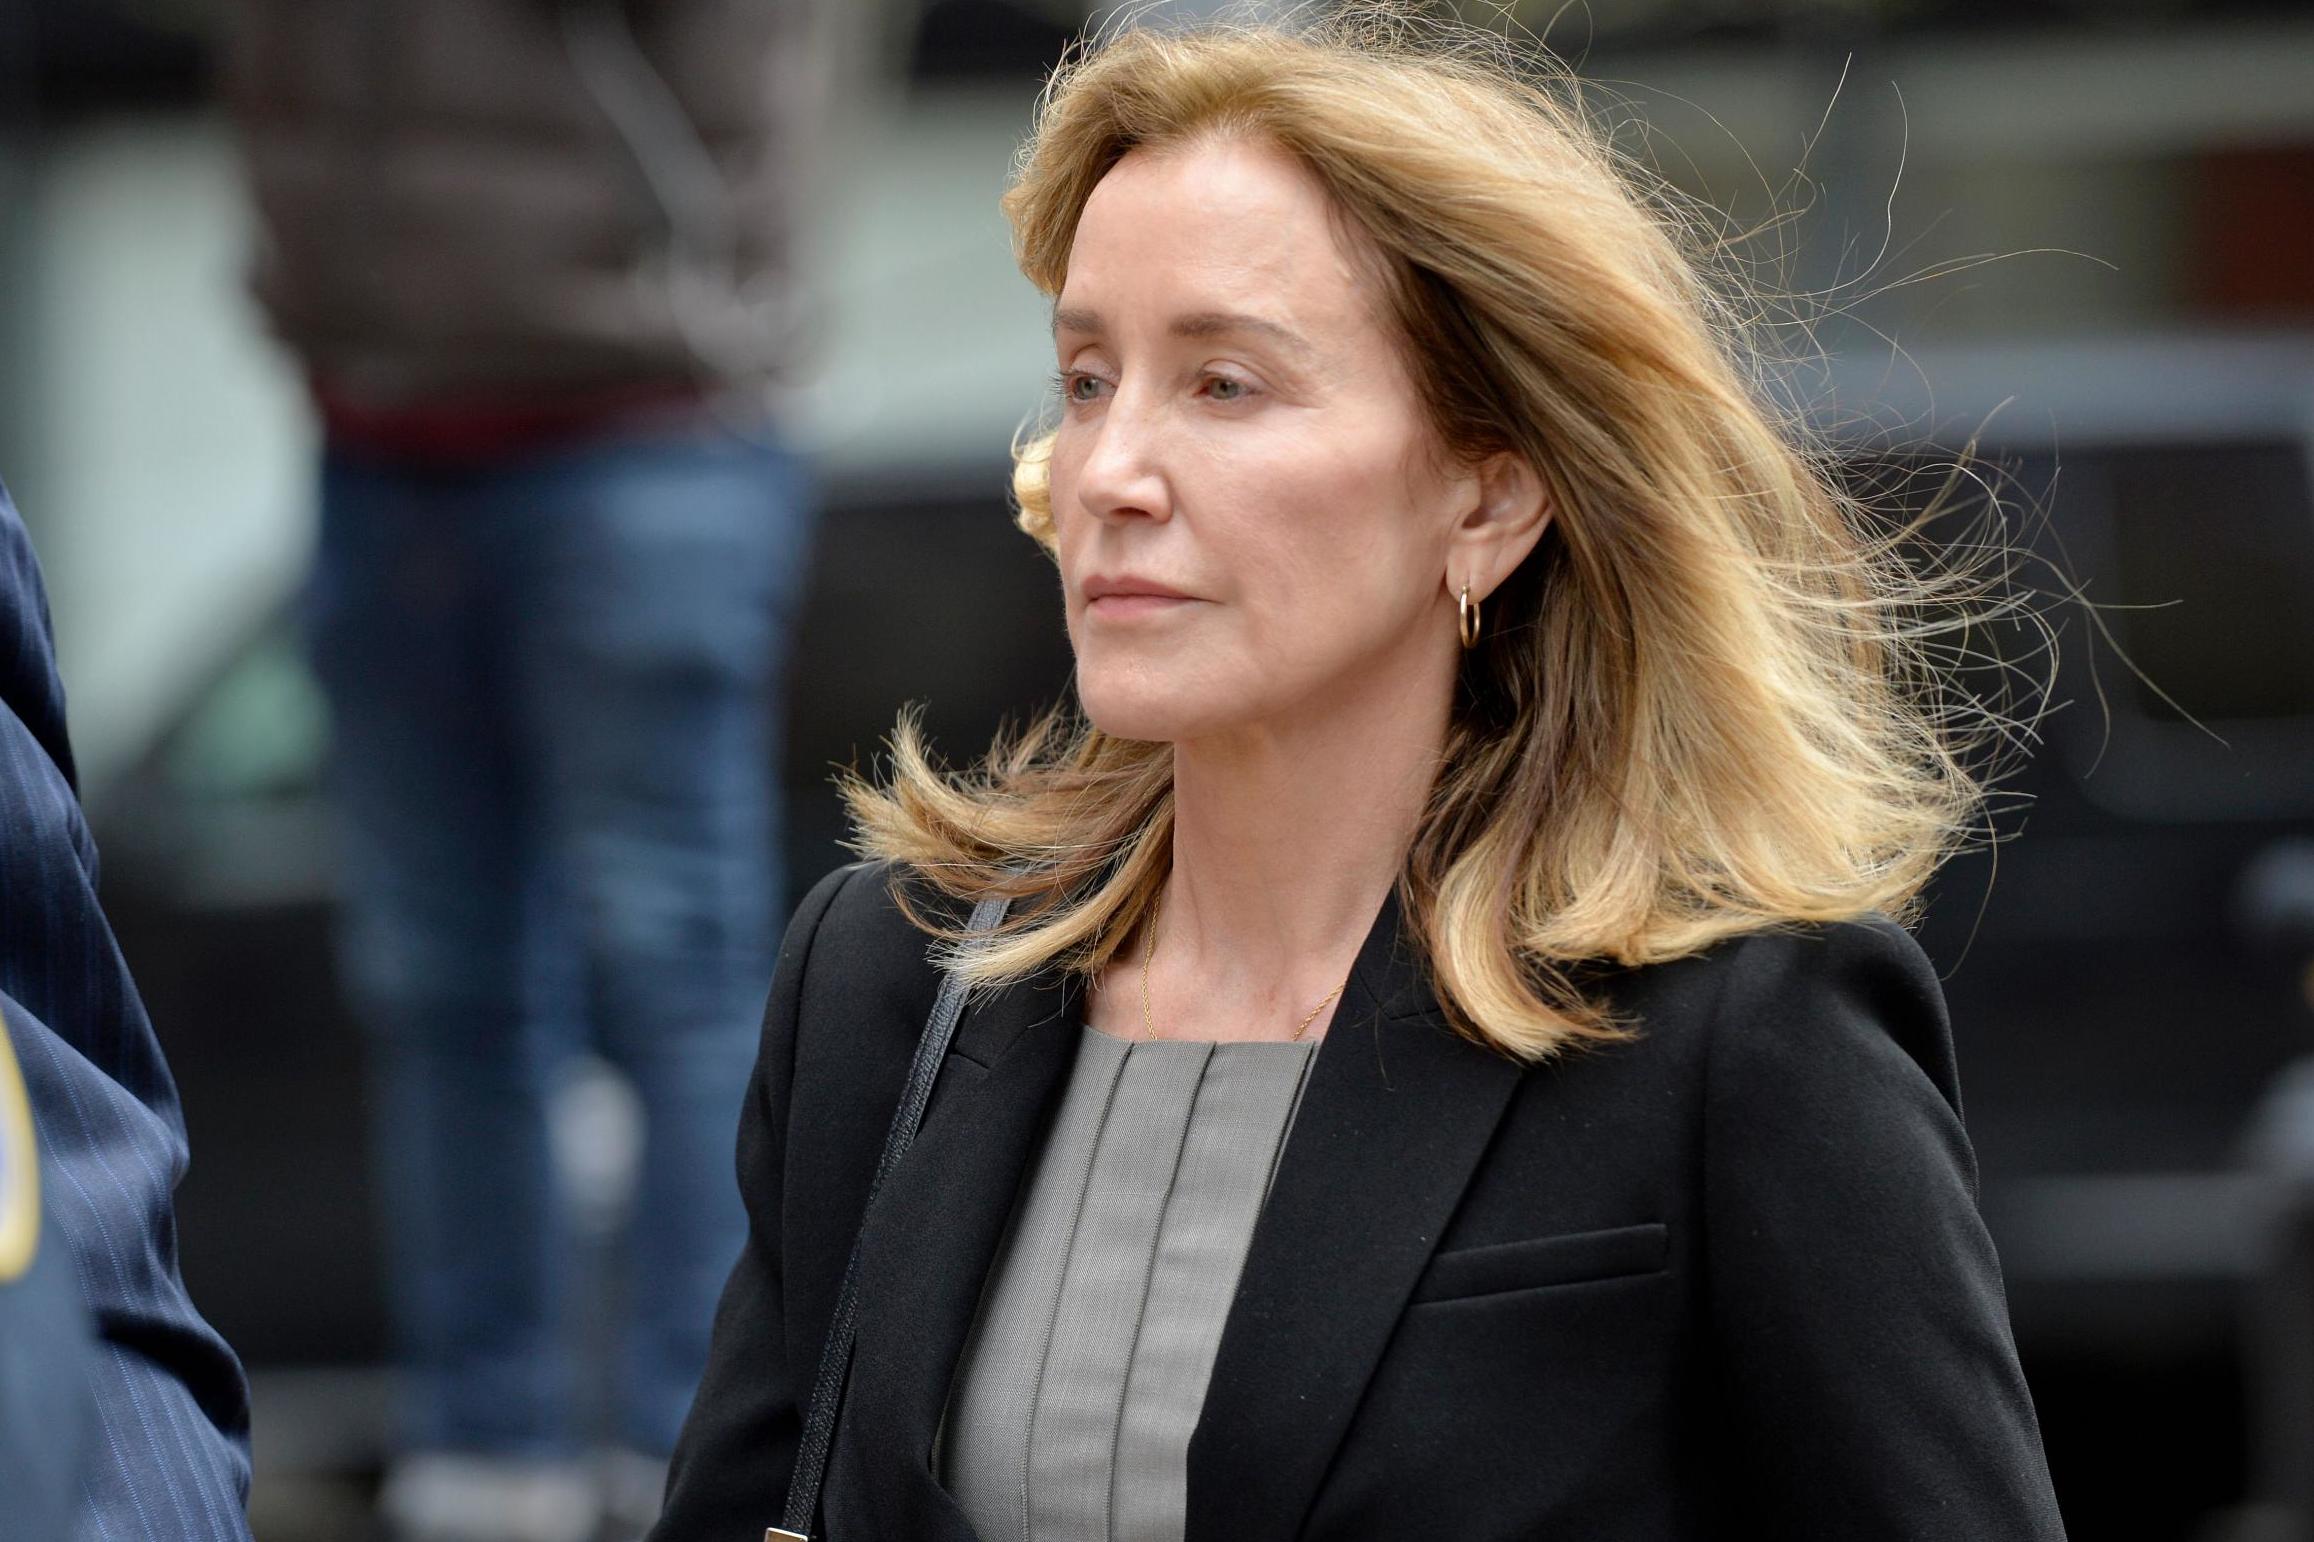 Felicity Huffman: Actor pleads guilty in college admissions scandal